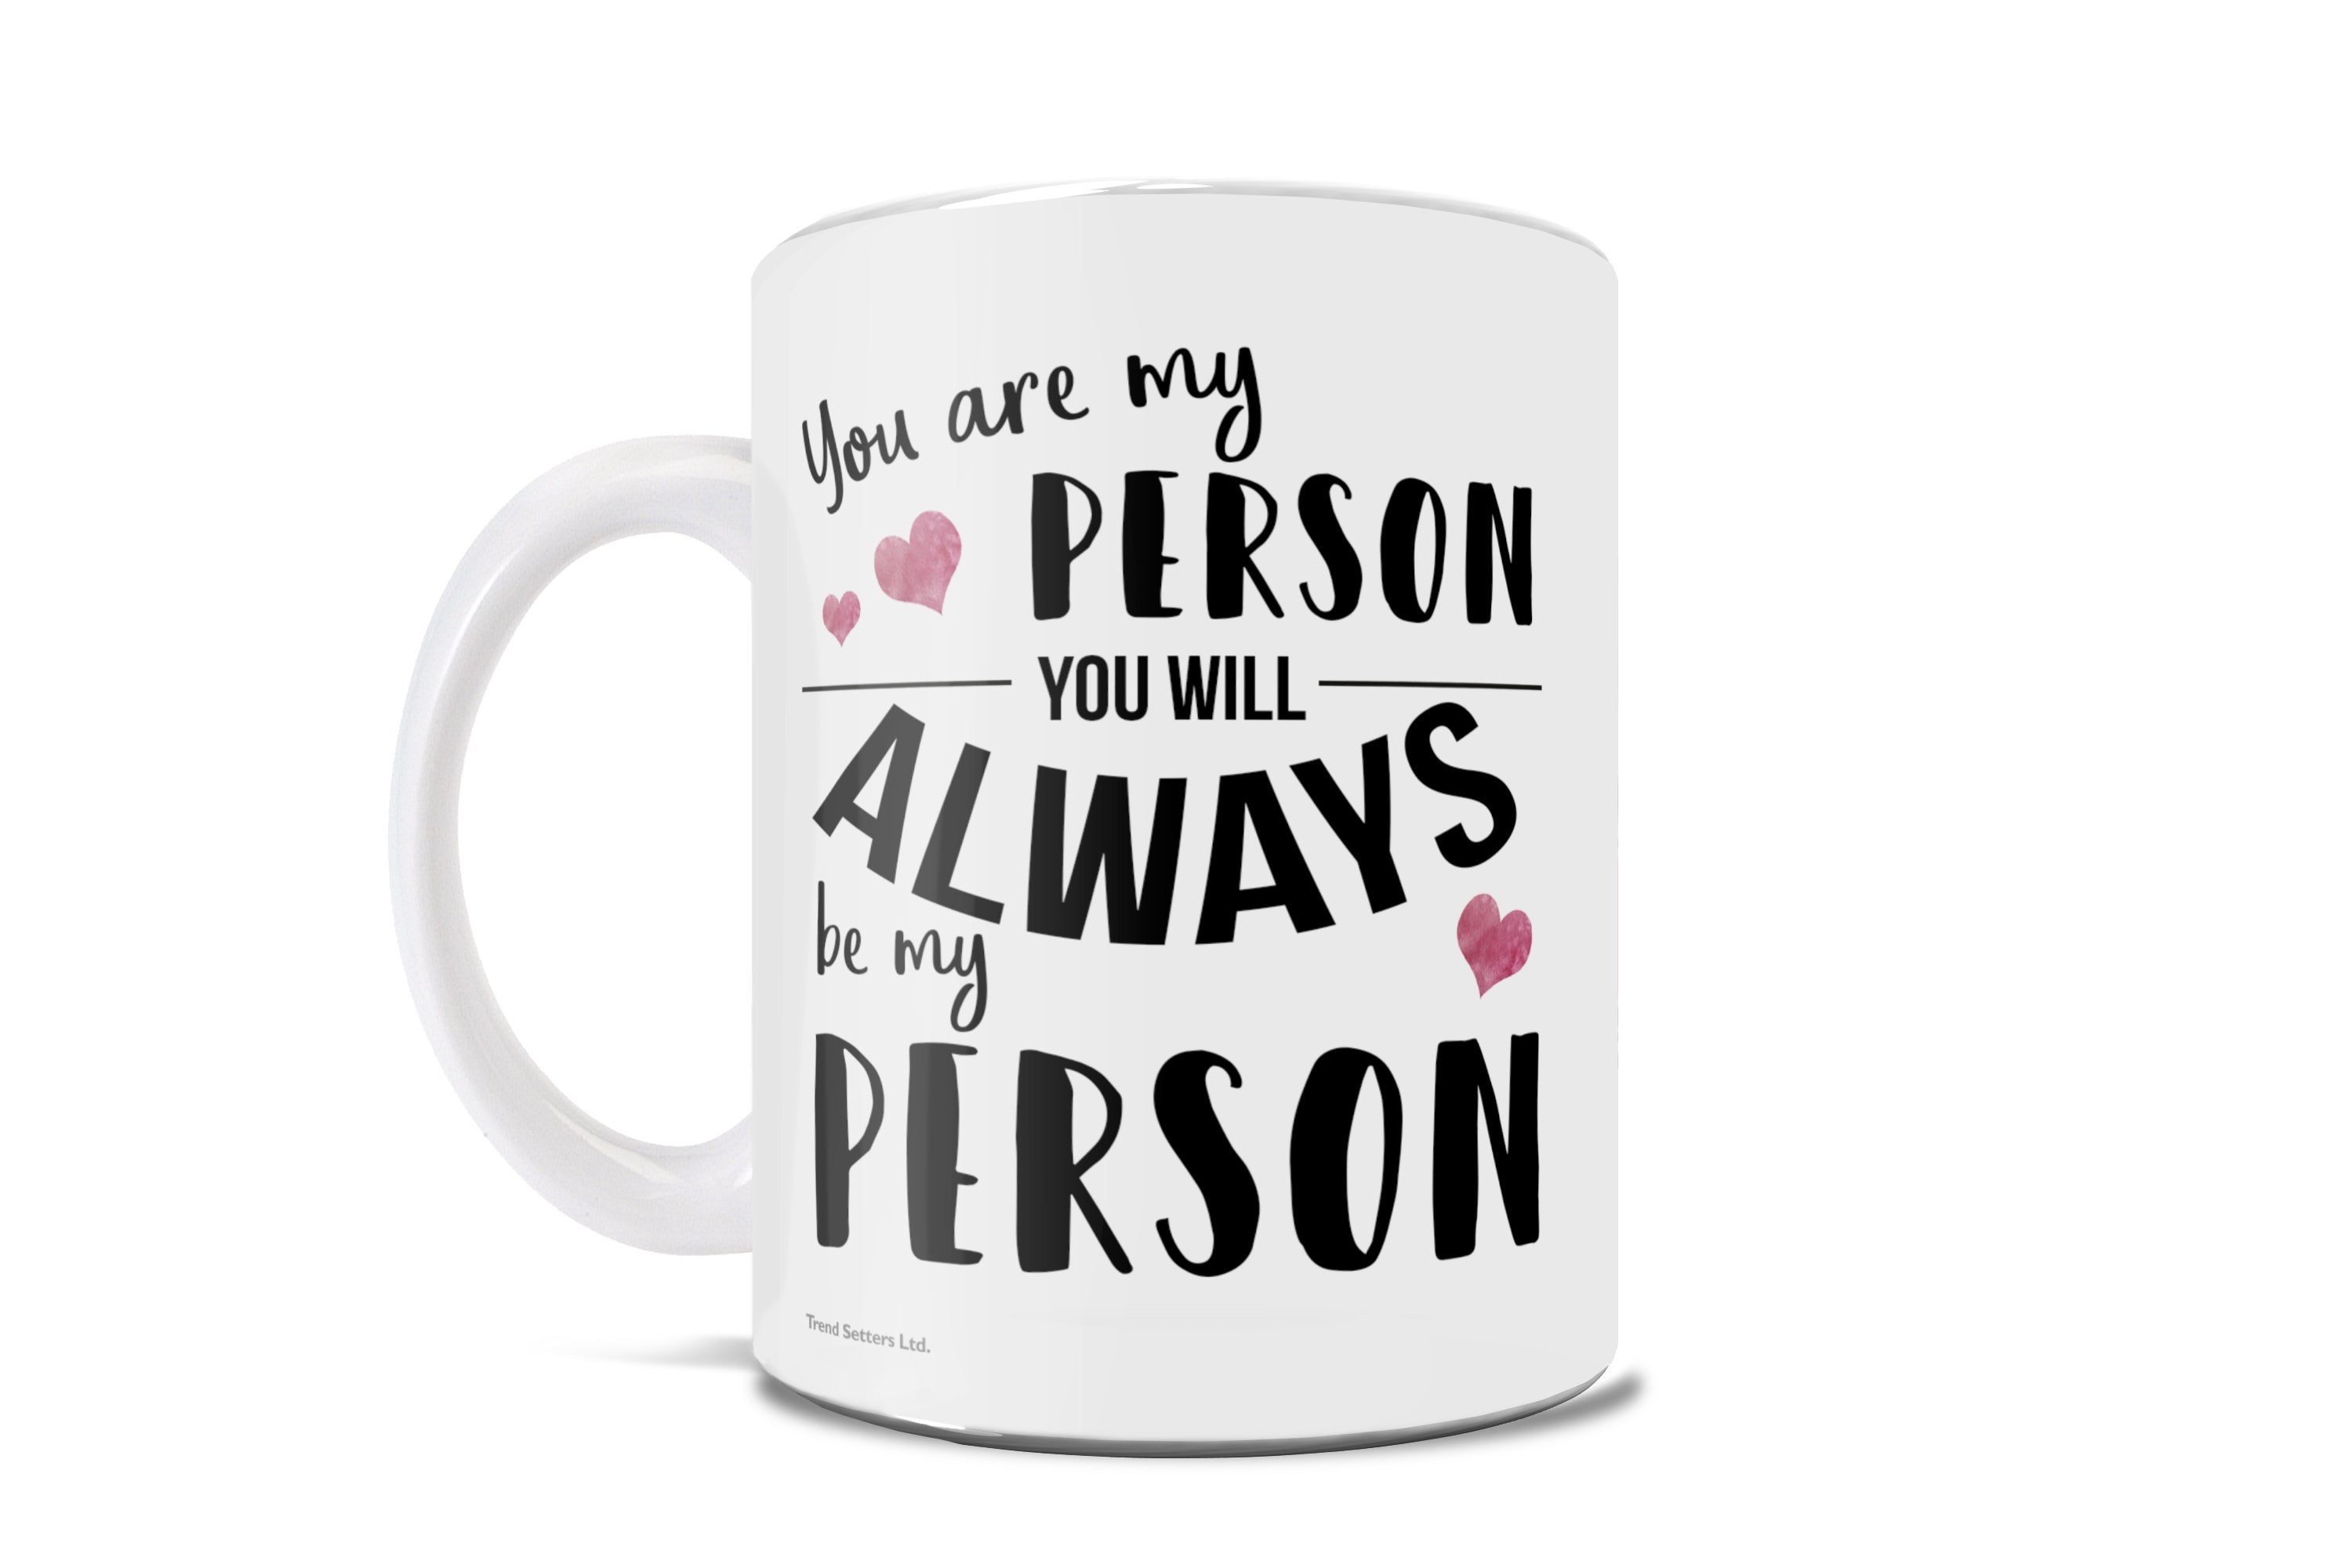 Best Friends Collection (You Are My Person) 11 oz Ceramic Mug WMUG1089